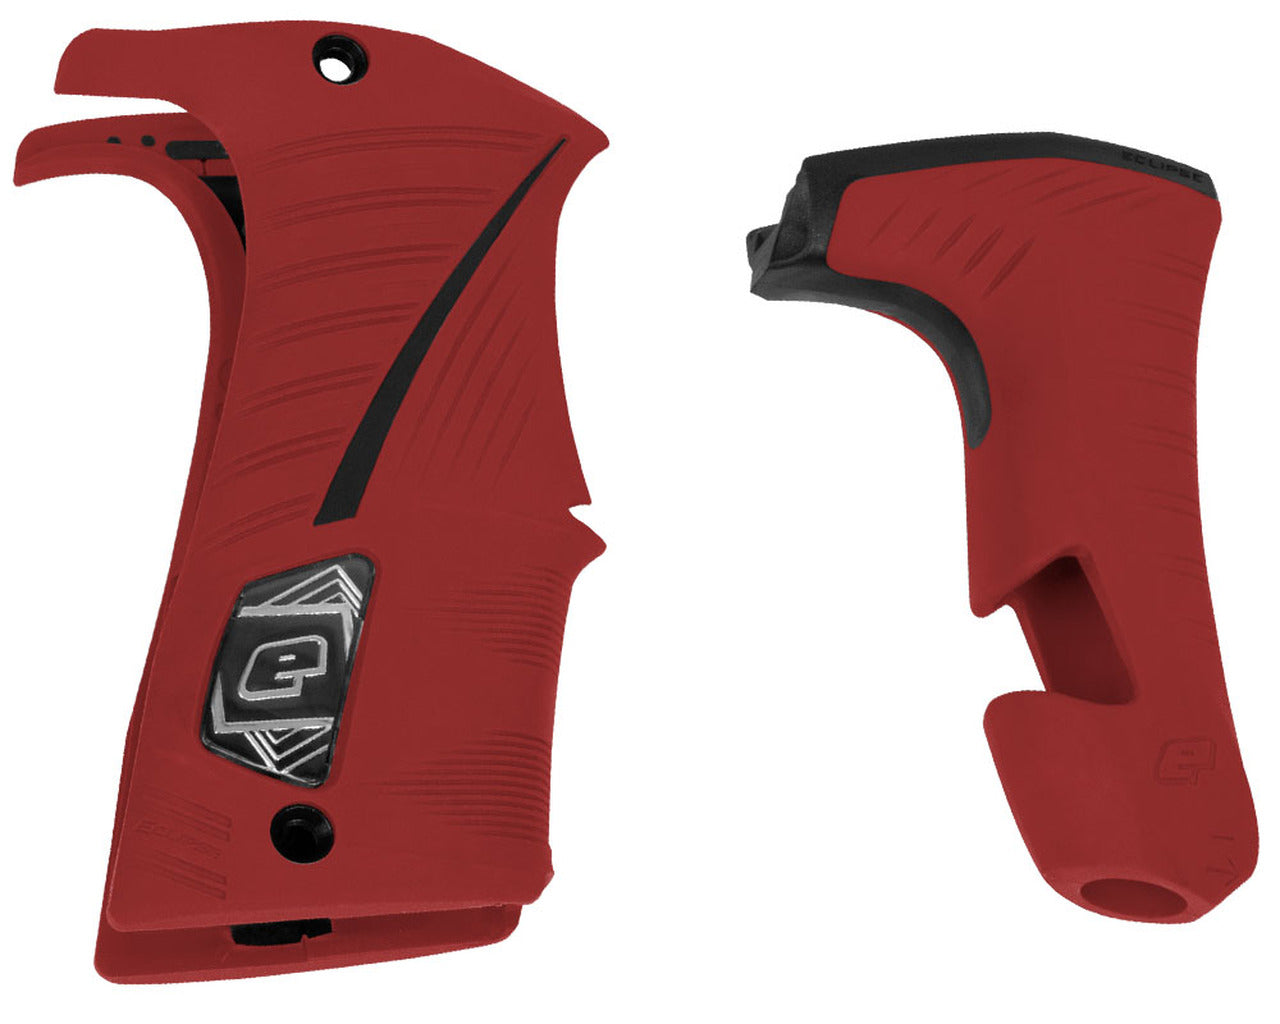 Planet Eclipse LV2 Grip Kit Red